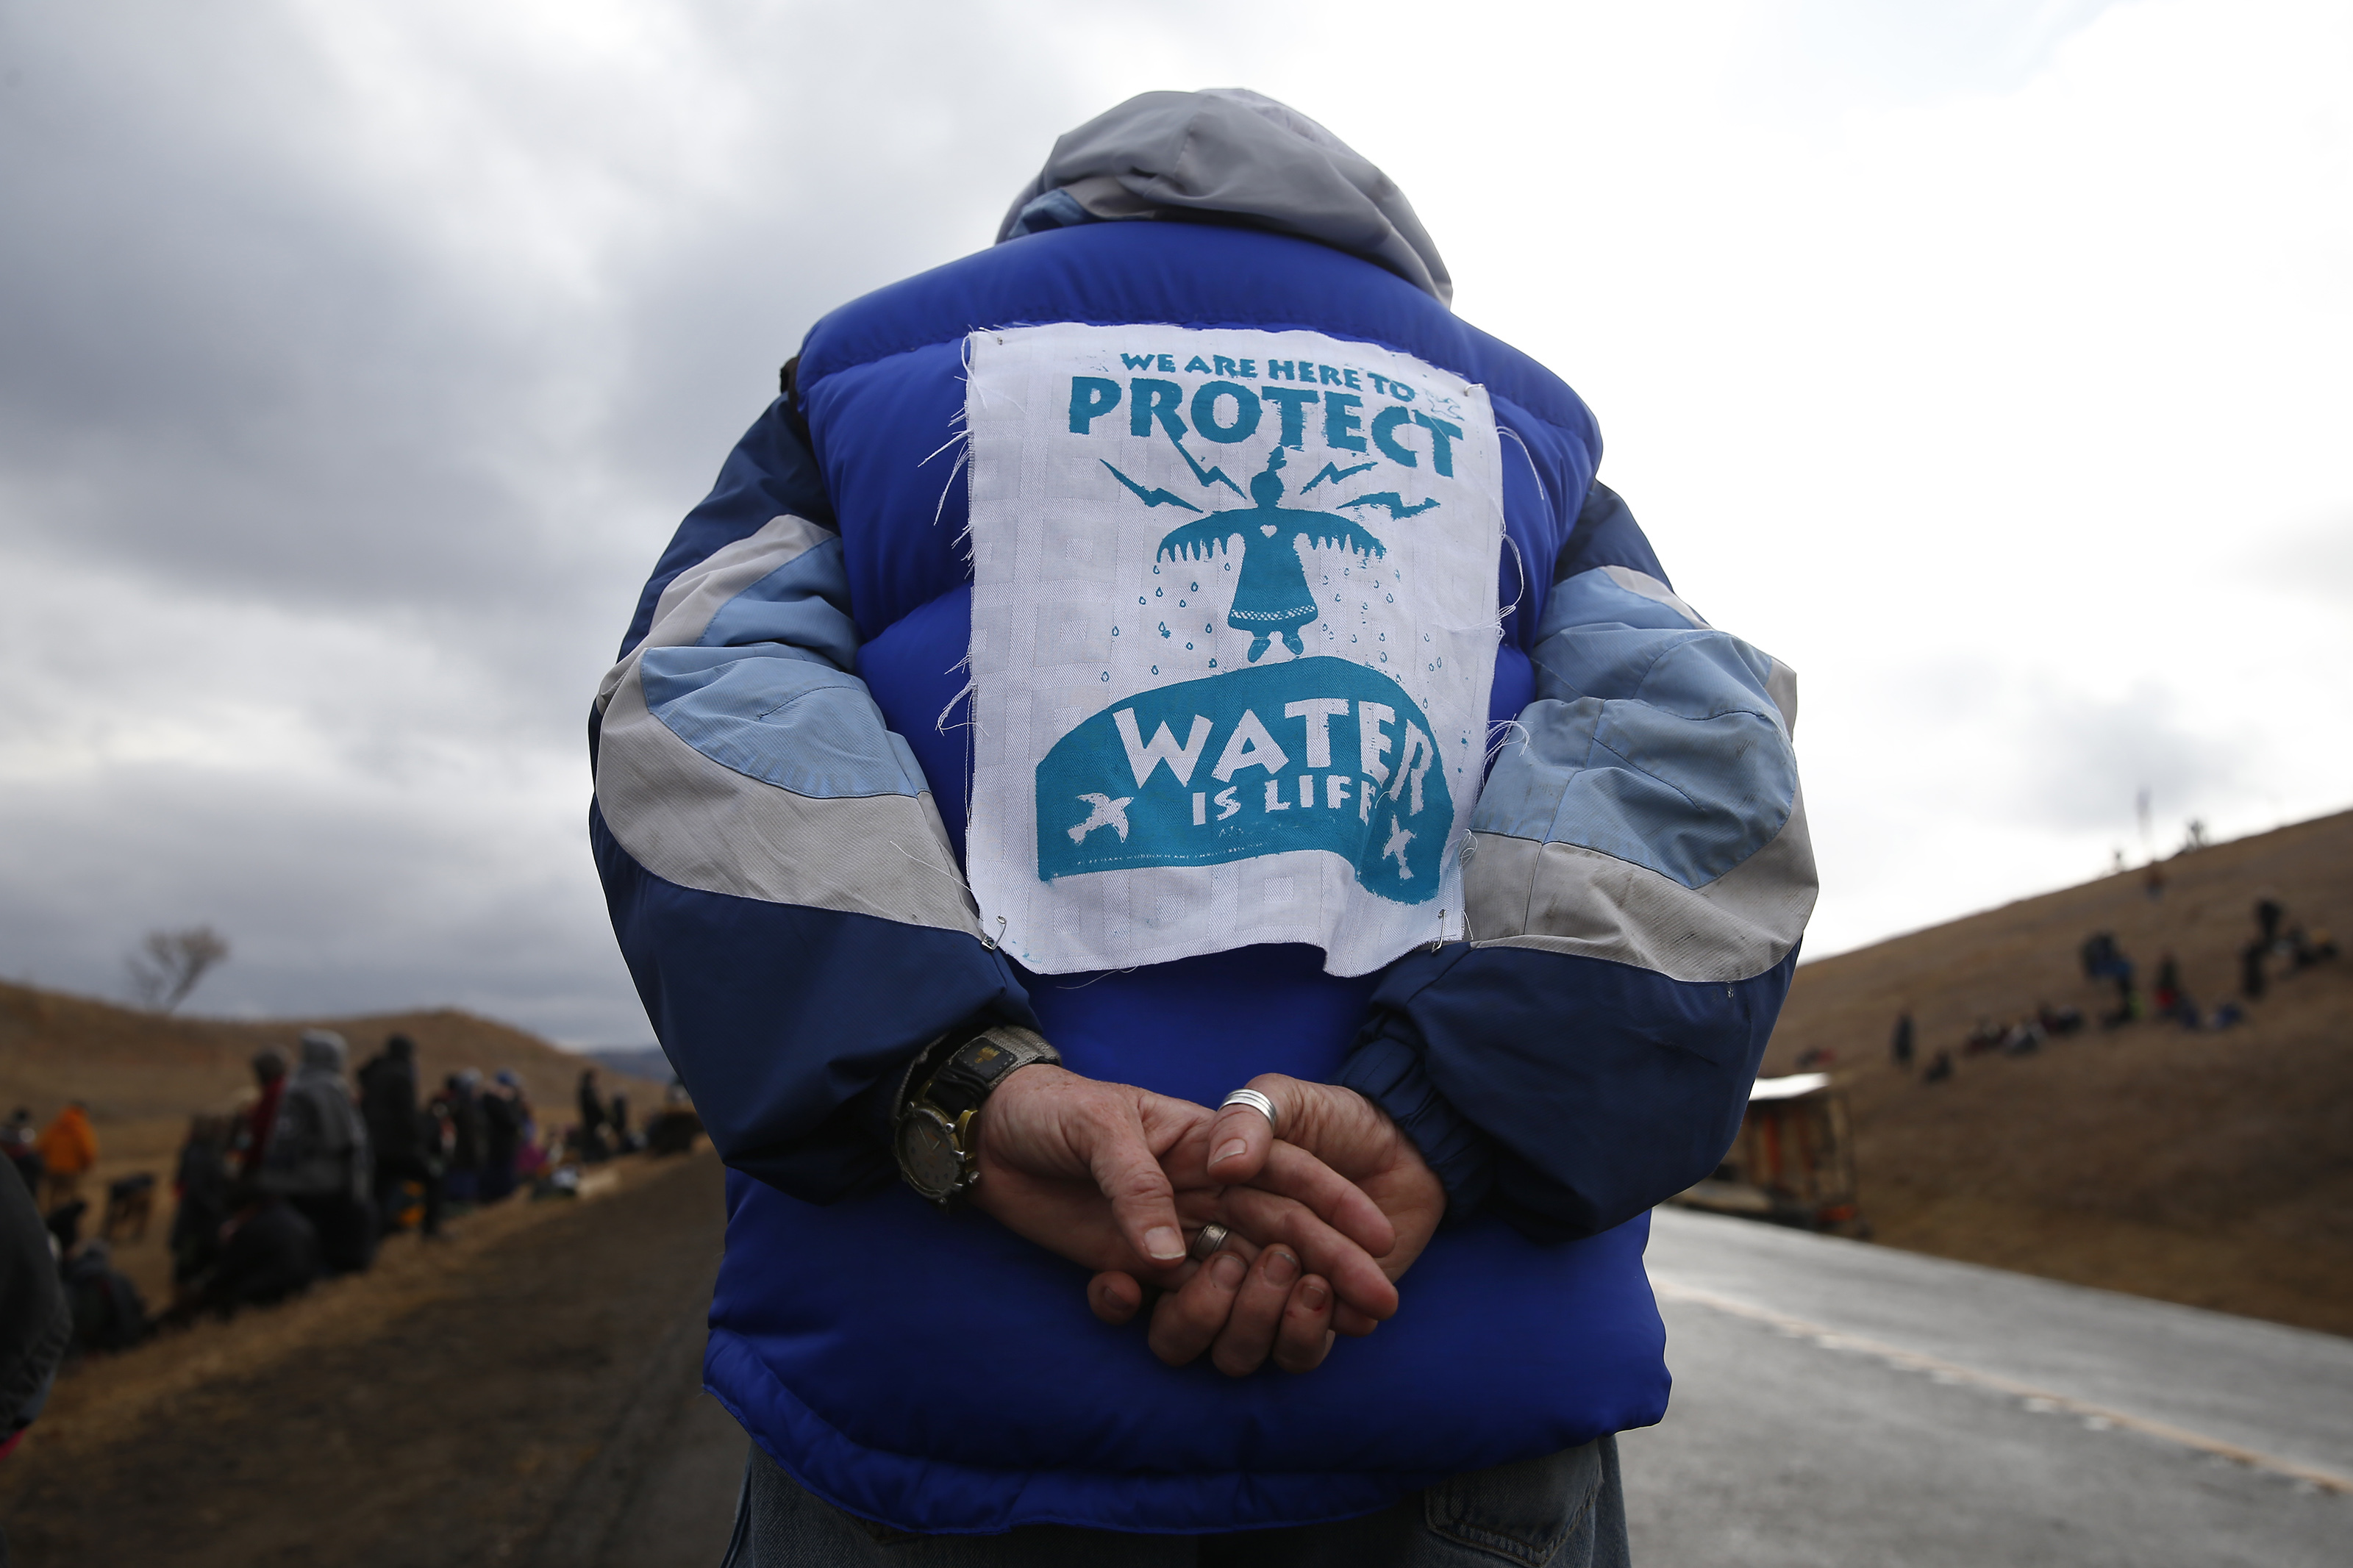 Protesters protest along Highway 1806 at Standing Rock on Nov. 24, 2016, during an ongoing dispute over the building of the Dakota Access Pipeline. (Jessica Rinaldi/Boston Globe—Boston Globe)